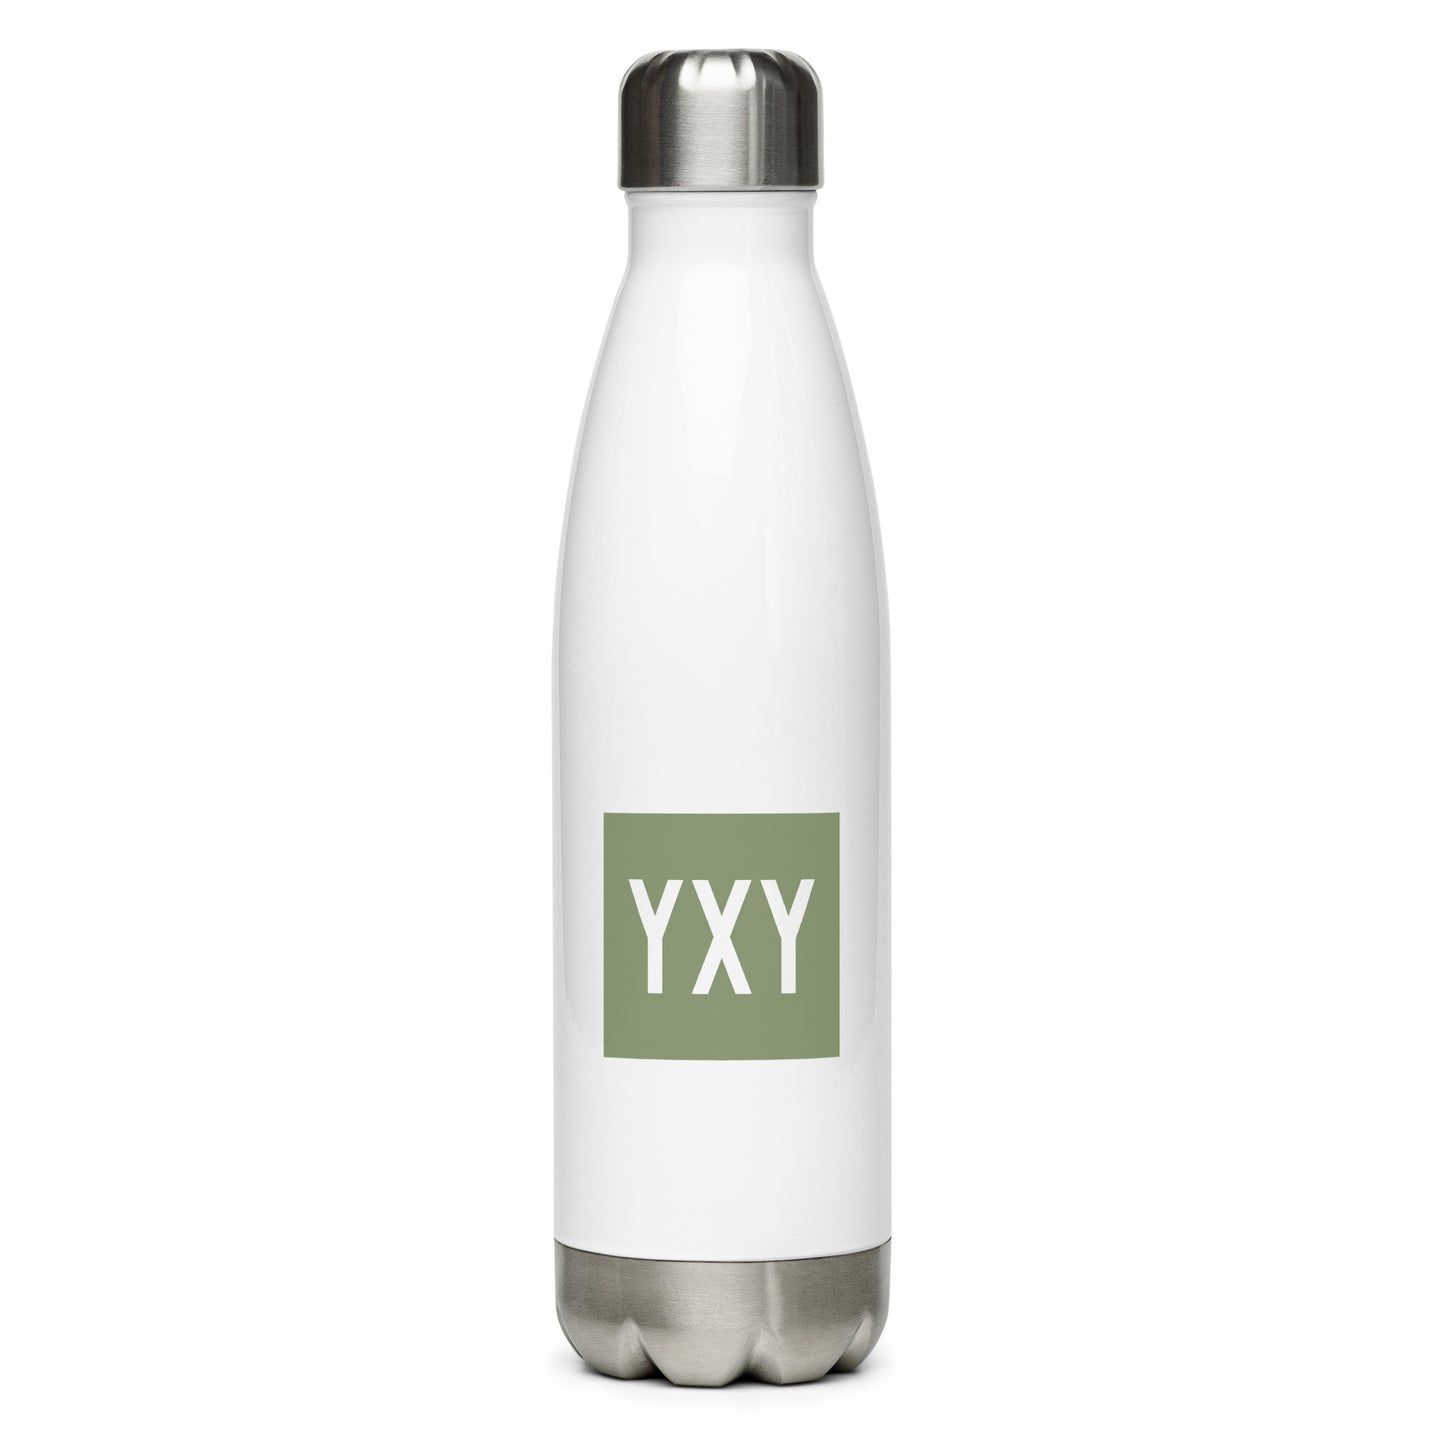 Aviation Gift Water Bottle - Camo Green • YXY Whitehorse • YHM Designs - Image 01